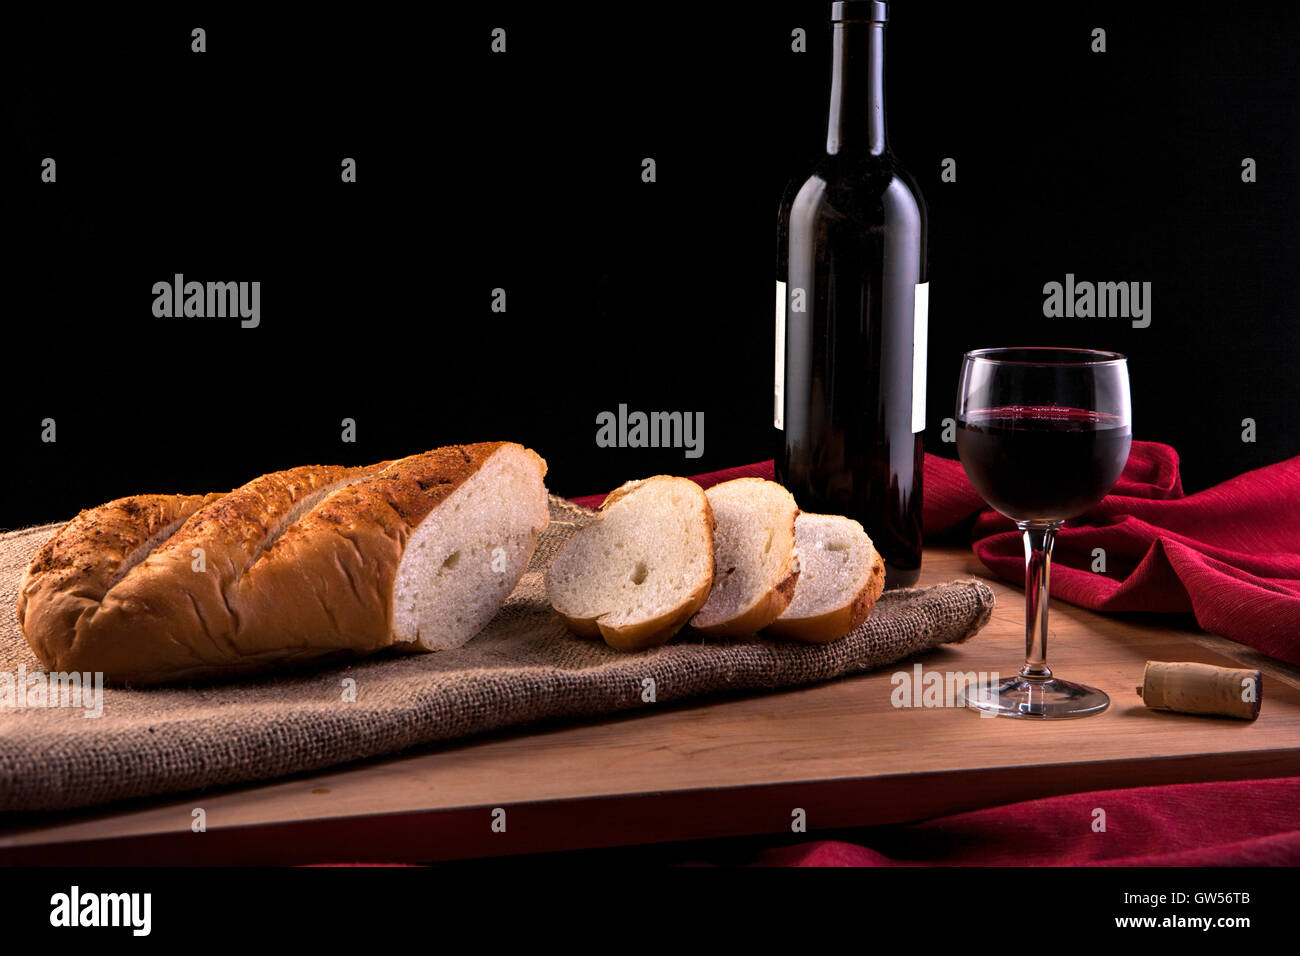 Slices from a loaf of french bread and an wine glass and wine bottle. Stock Photo